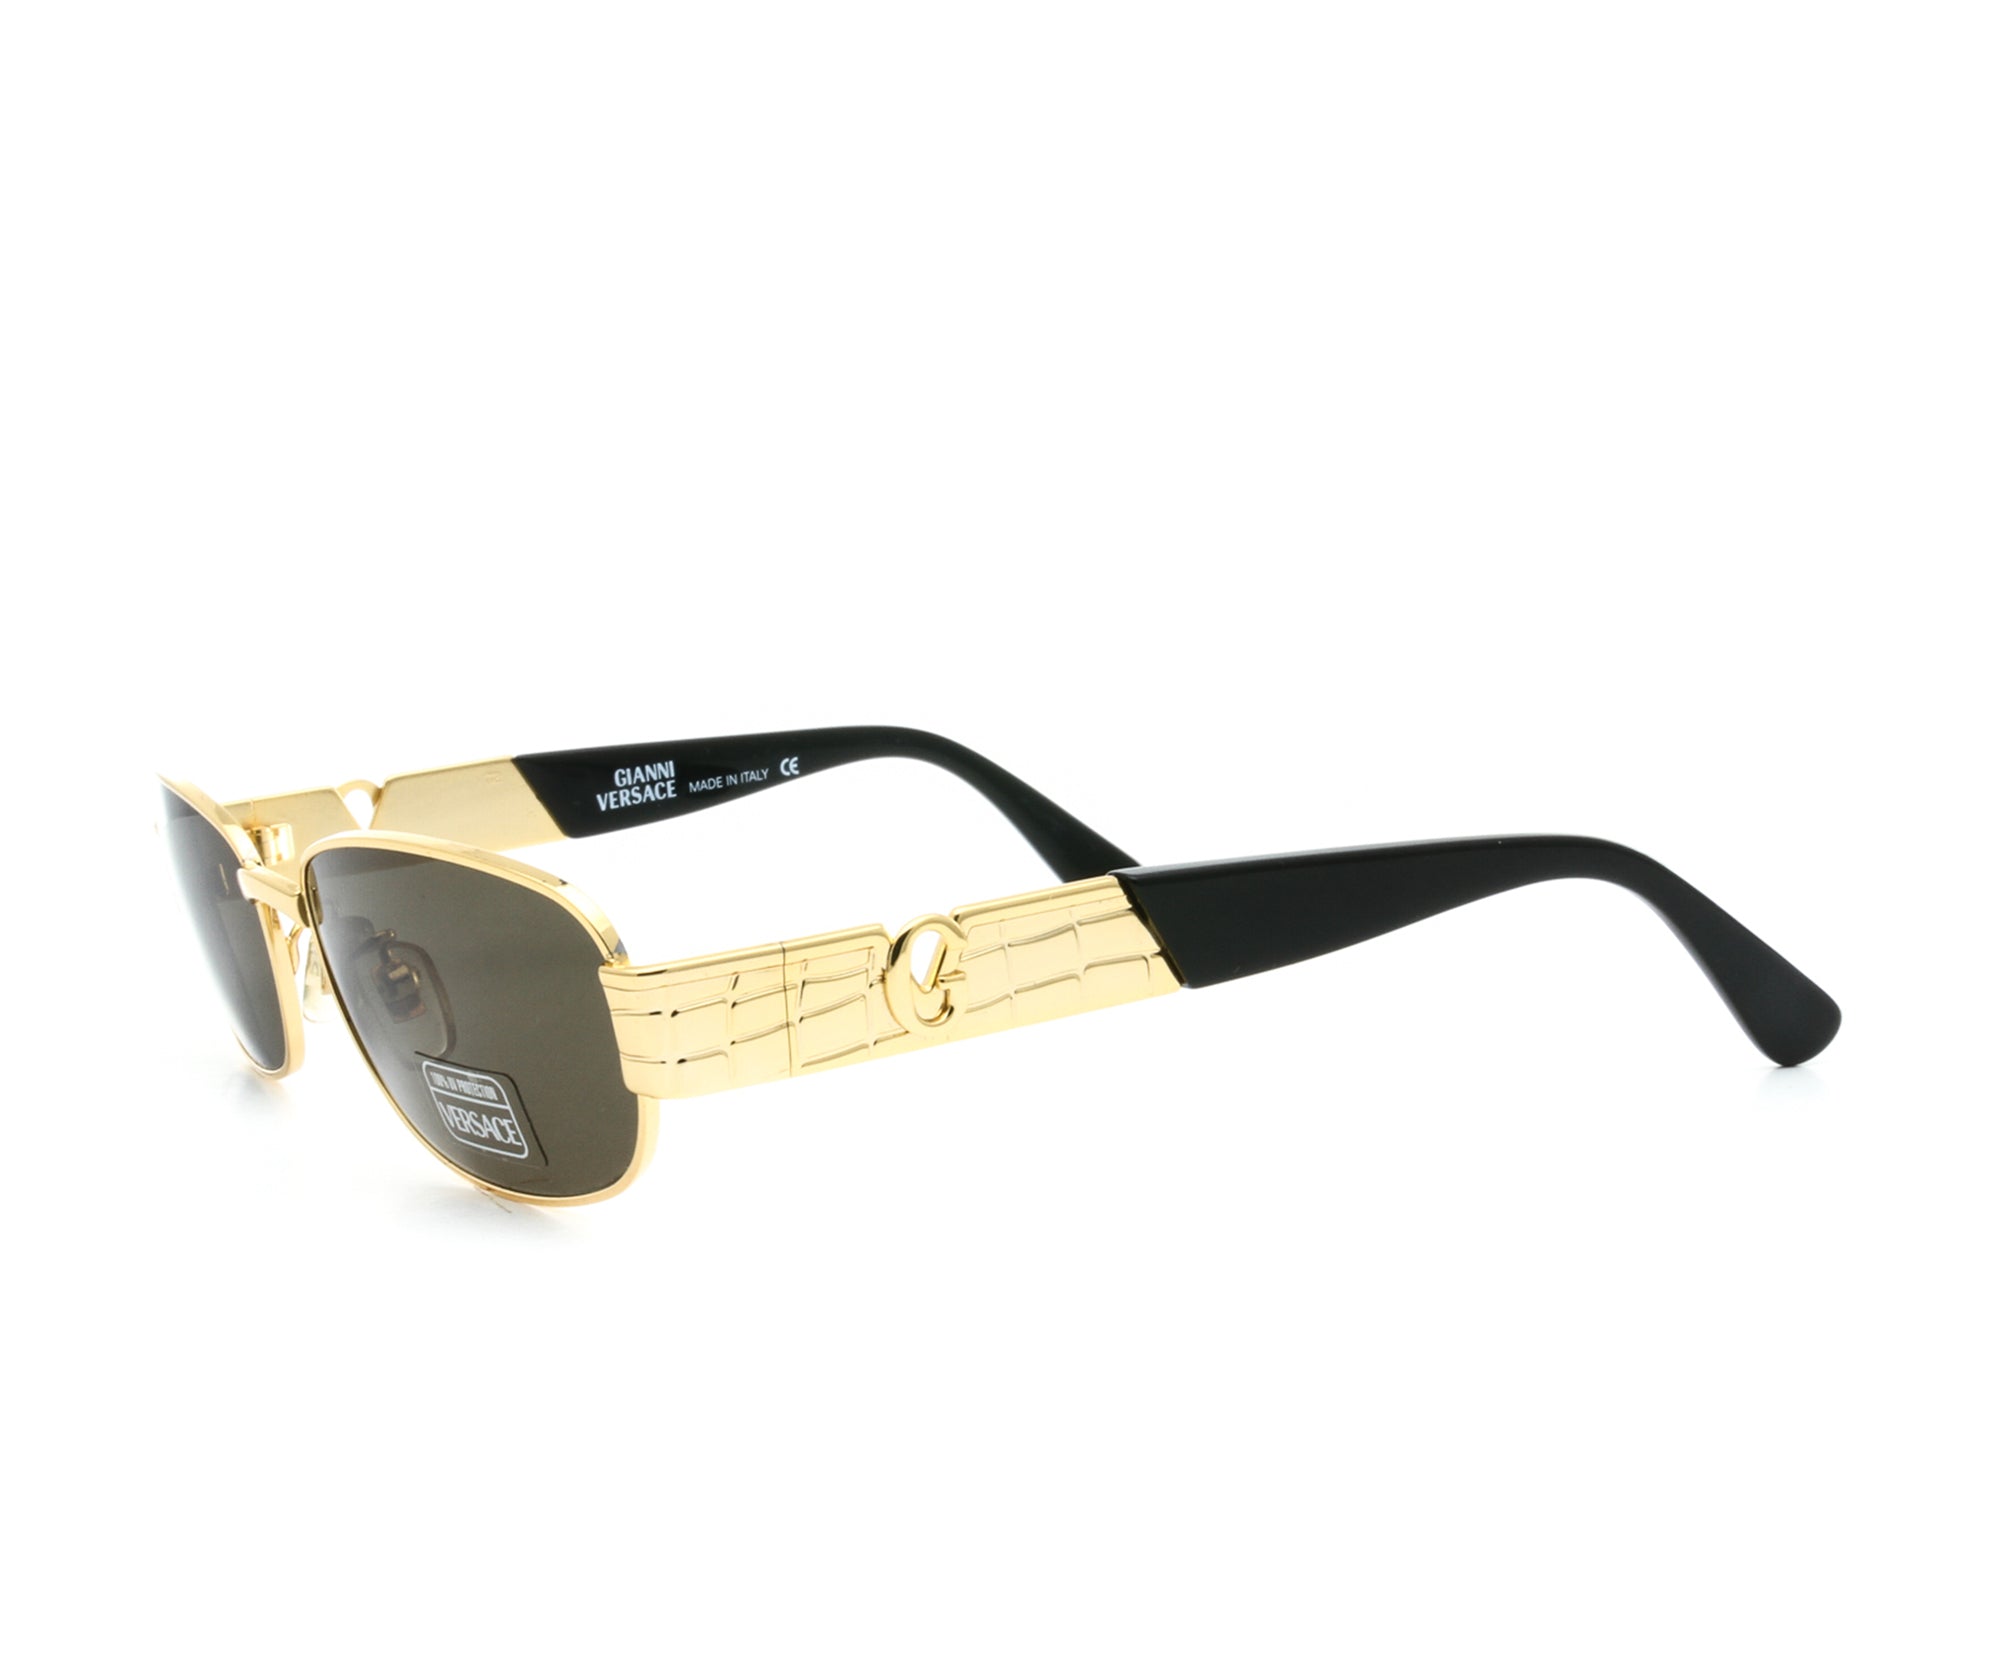 versace glasses frames prices